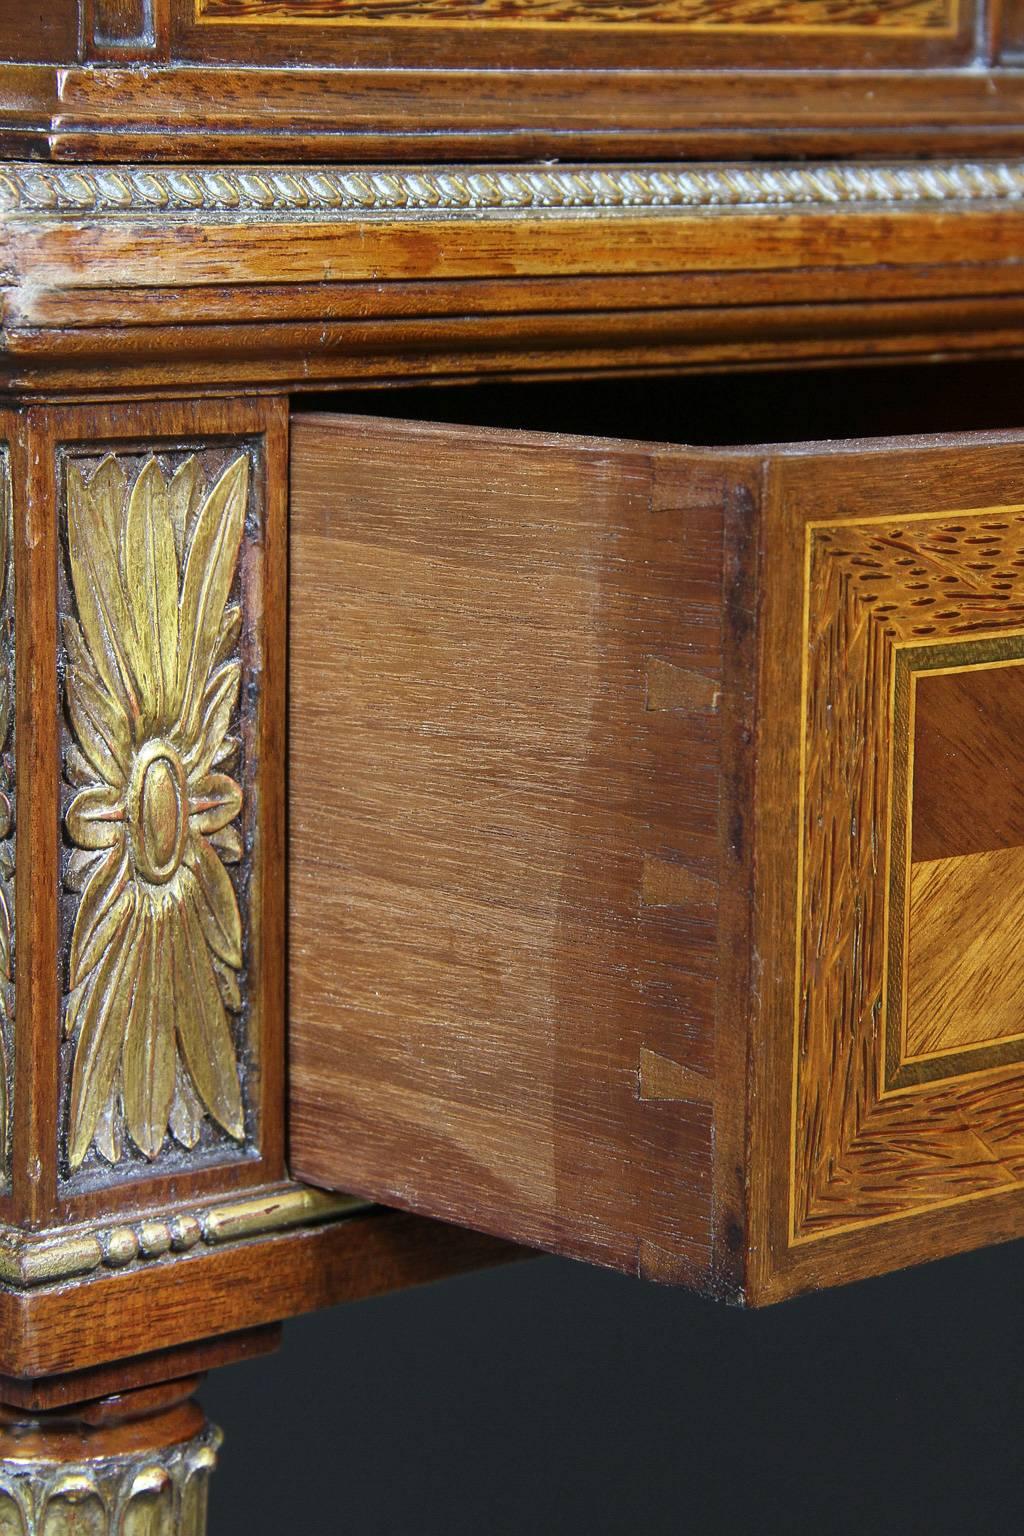 English Fine Regency Style Mahogany, Carved and Gilded Carlton House Desk by Gillows